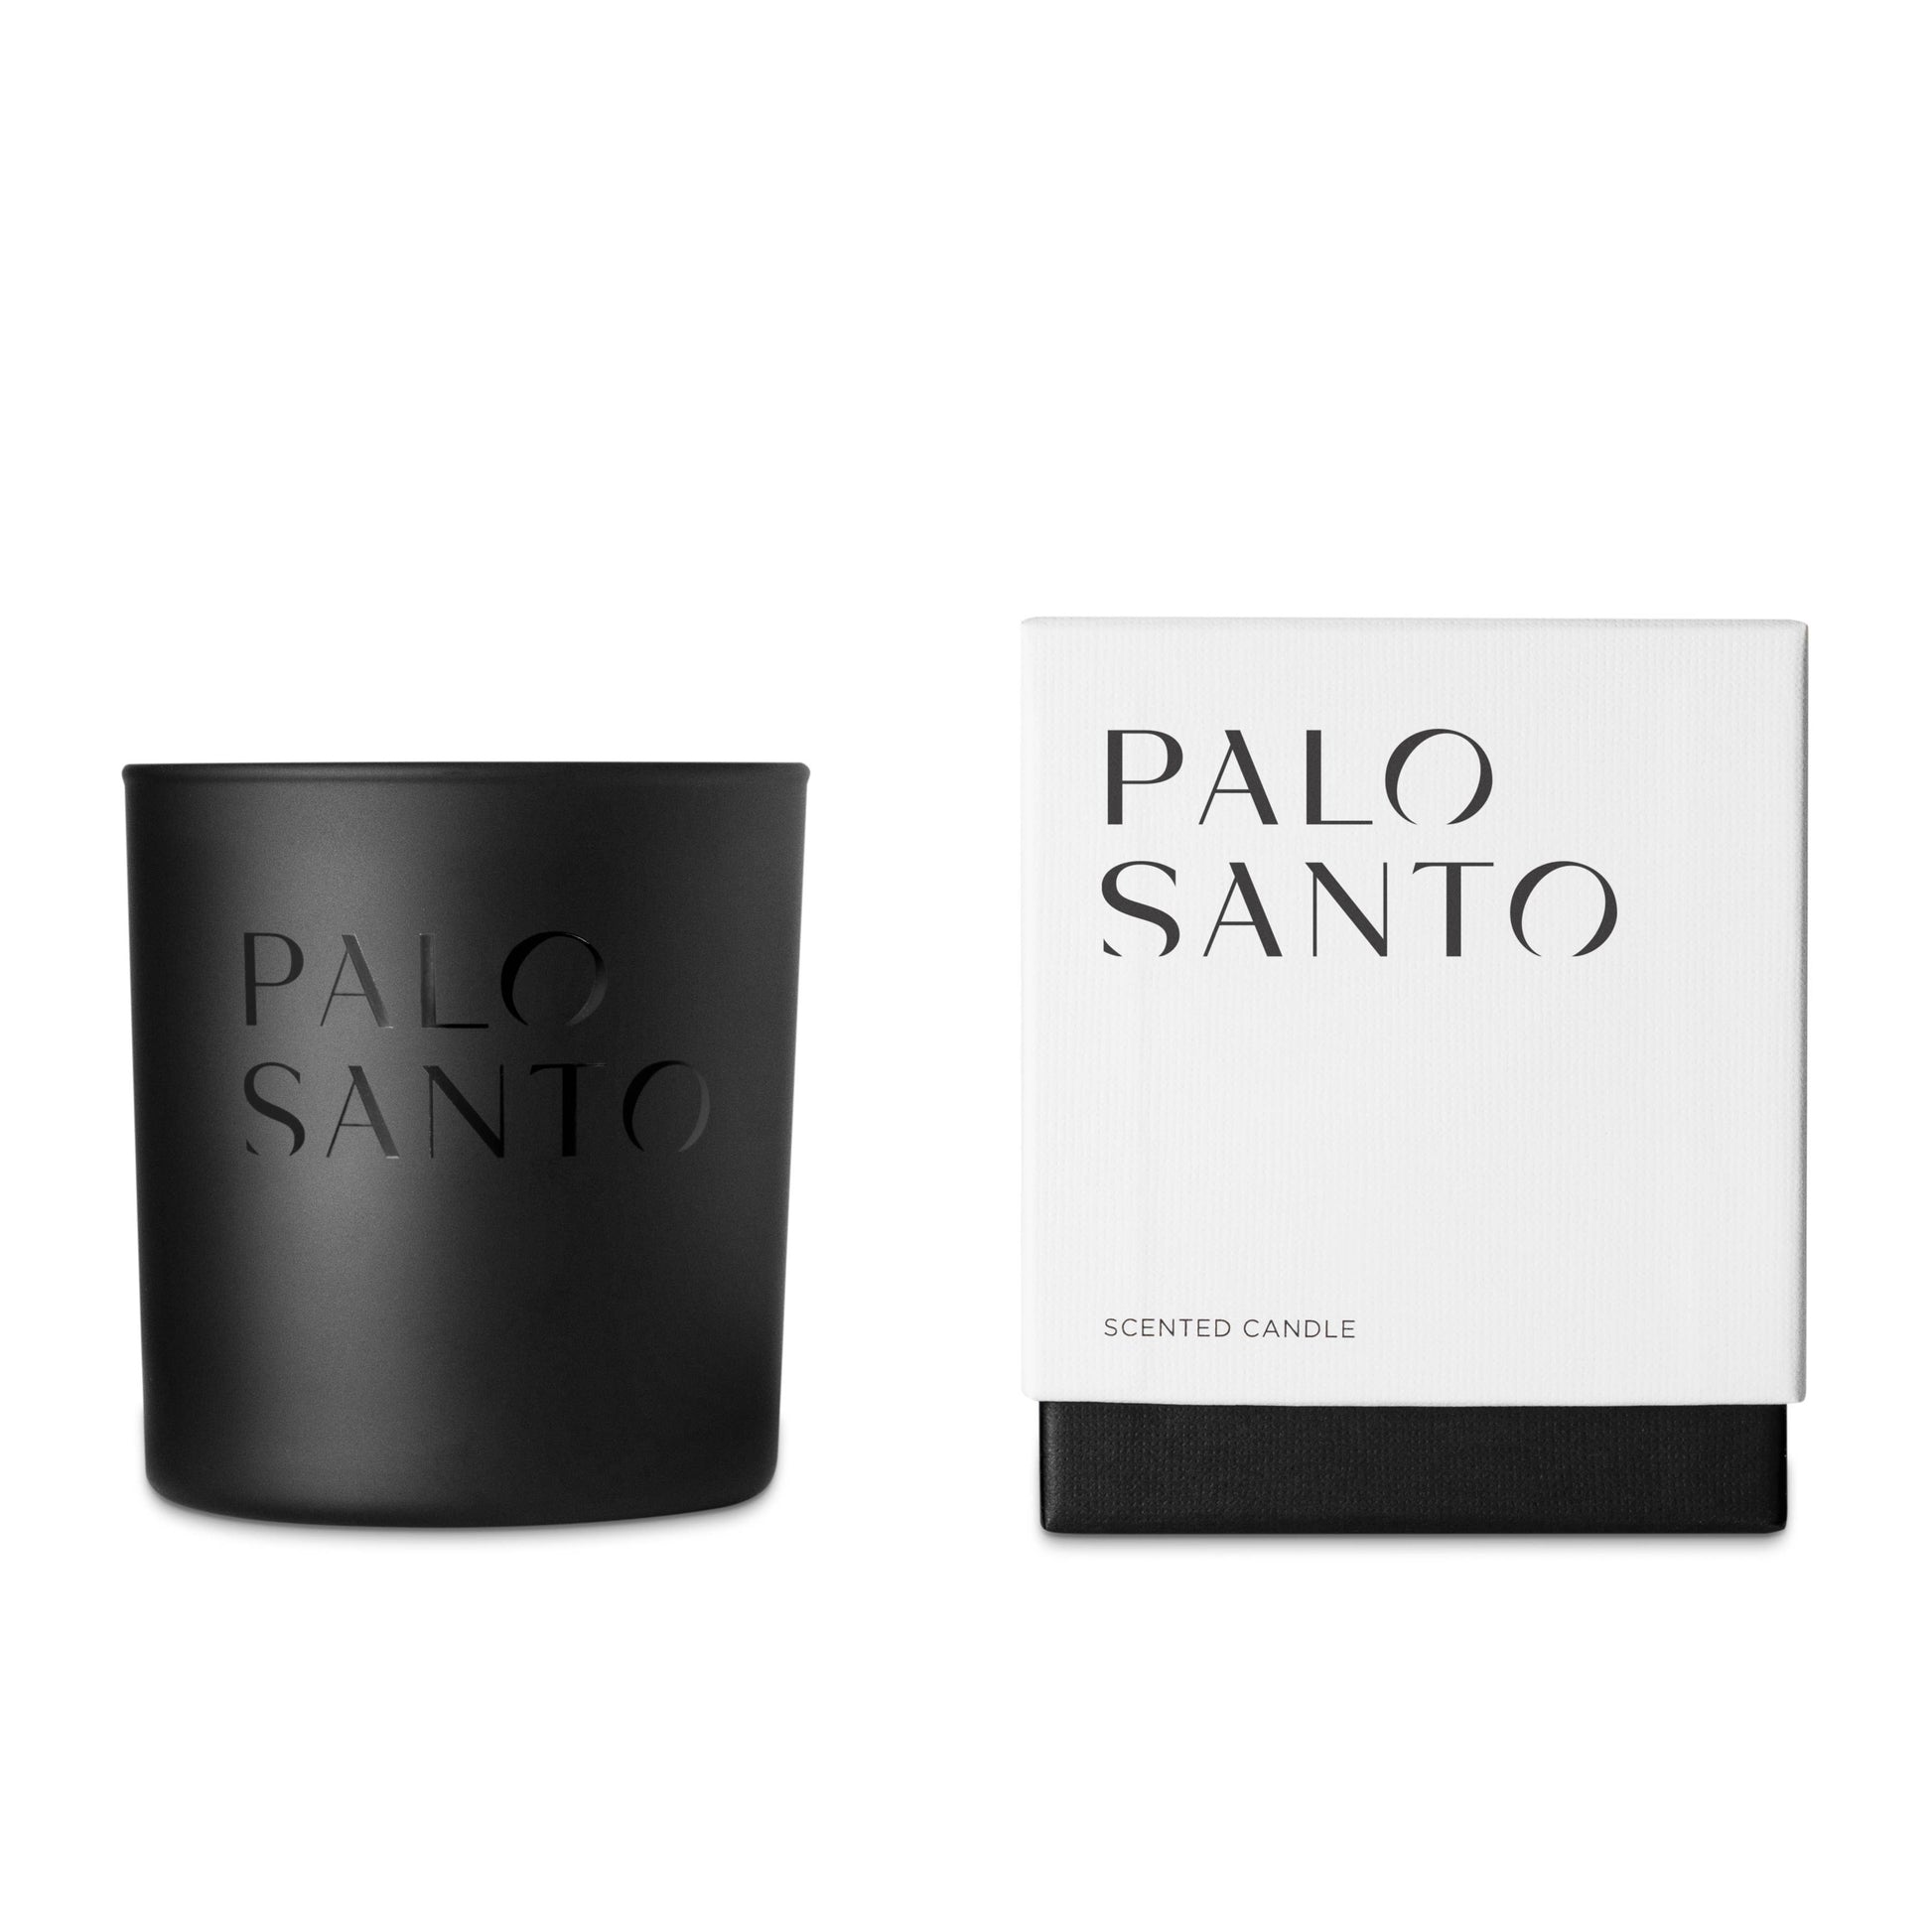 Palo Santo Eclipse Candle Collection - The Crowd Went Wild